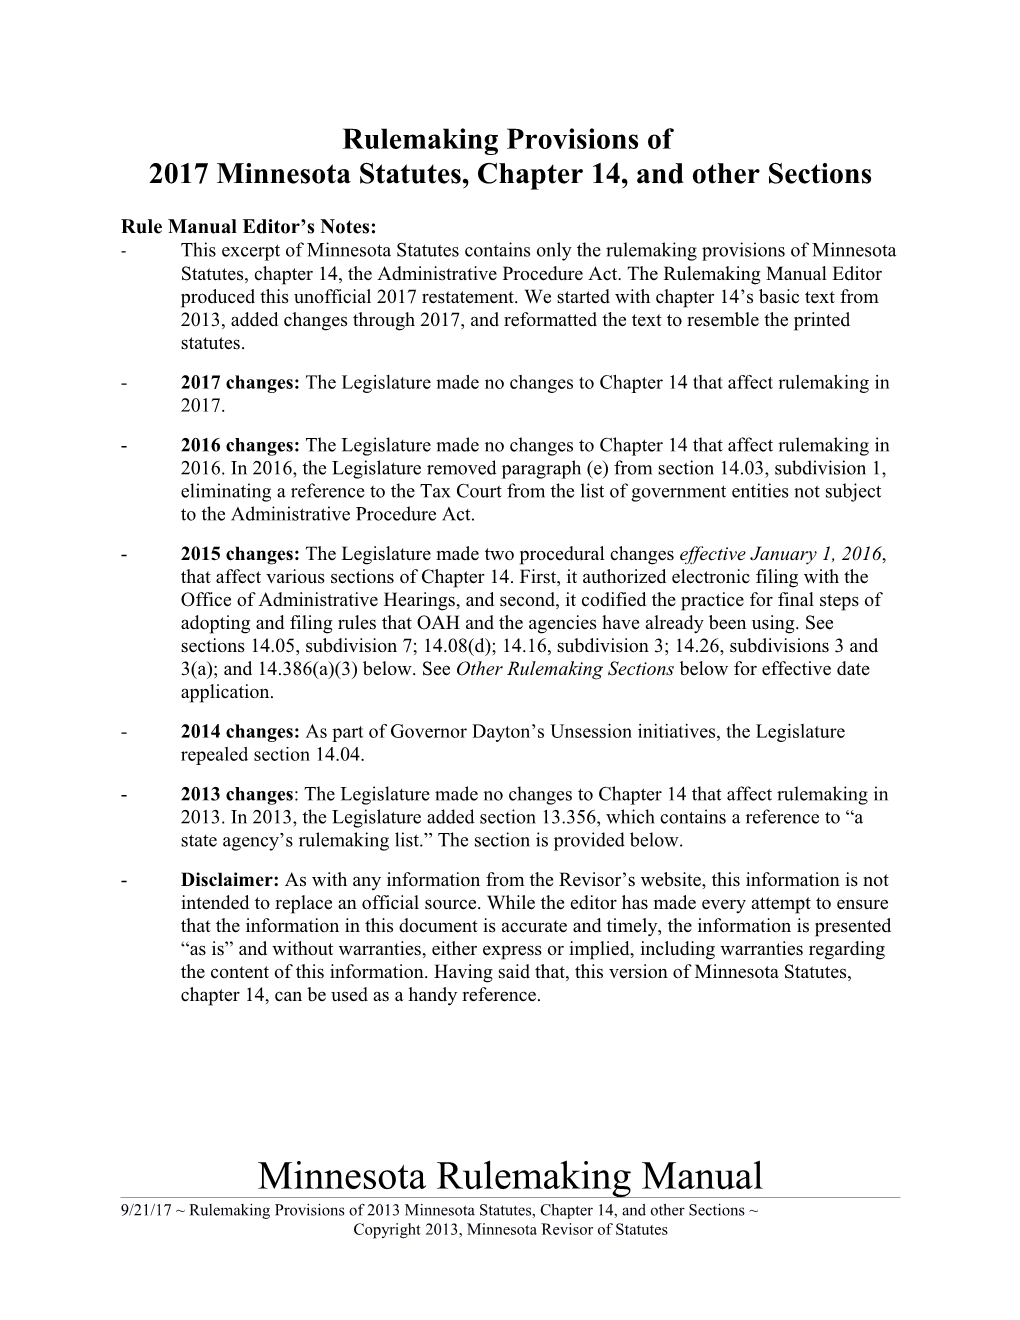 2017 Minnesota Statutes, Chapter 14, and Other Sections